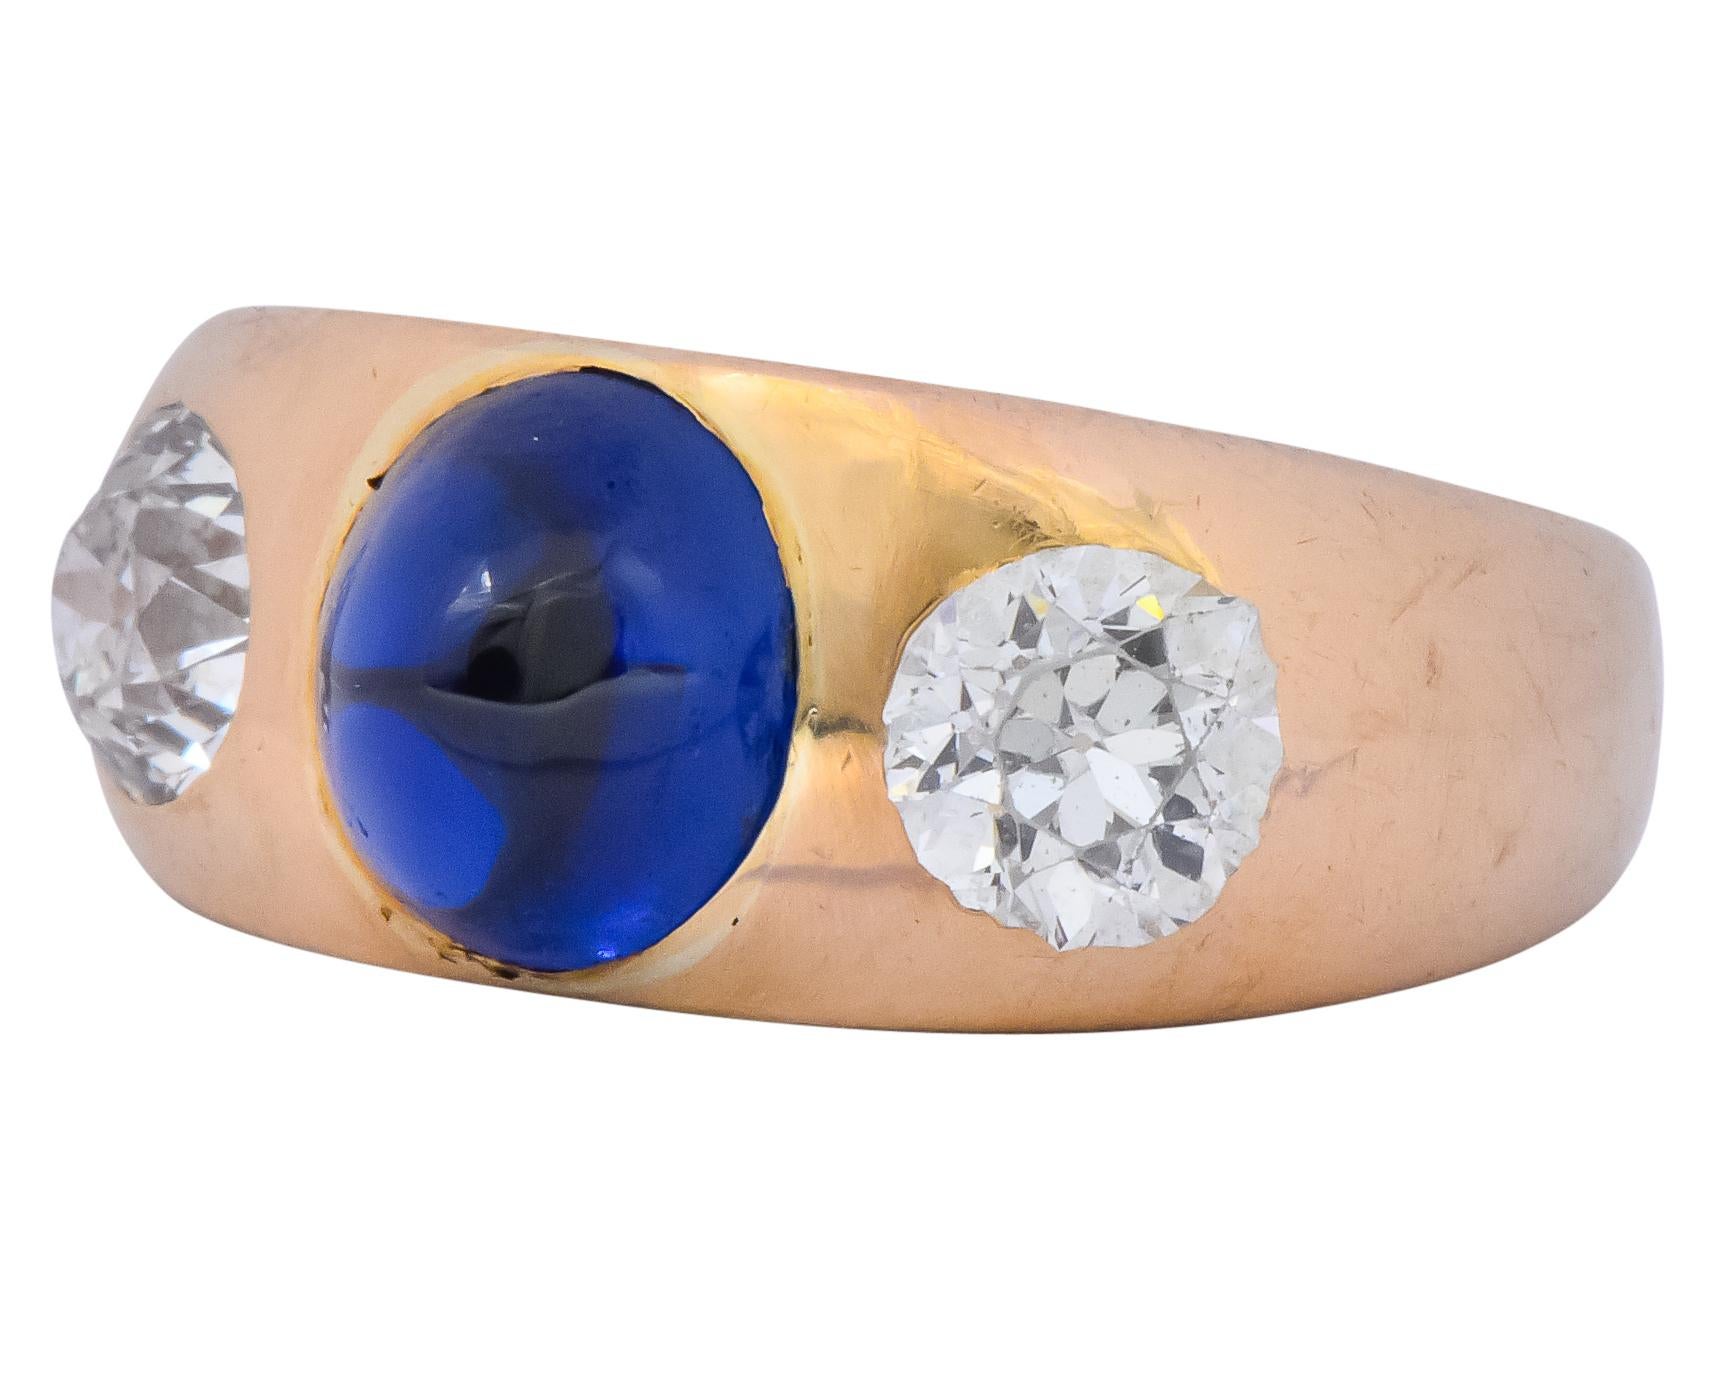 Centering an oval cabochon sapphire weighing approximately 2.10 carats, transparent blue color with no indications of heat treatment

Flanked by two old European cut diamonds weighing approximately 1.30 carats total, H/I in color and VS